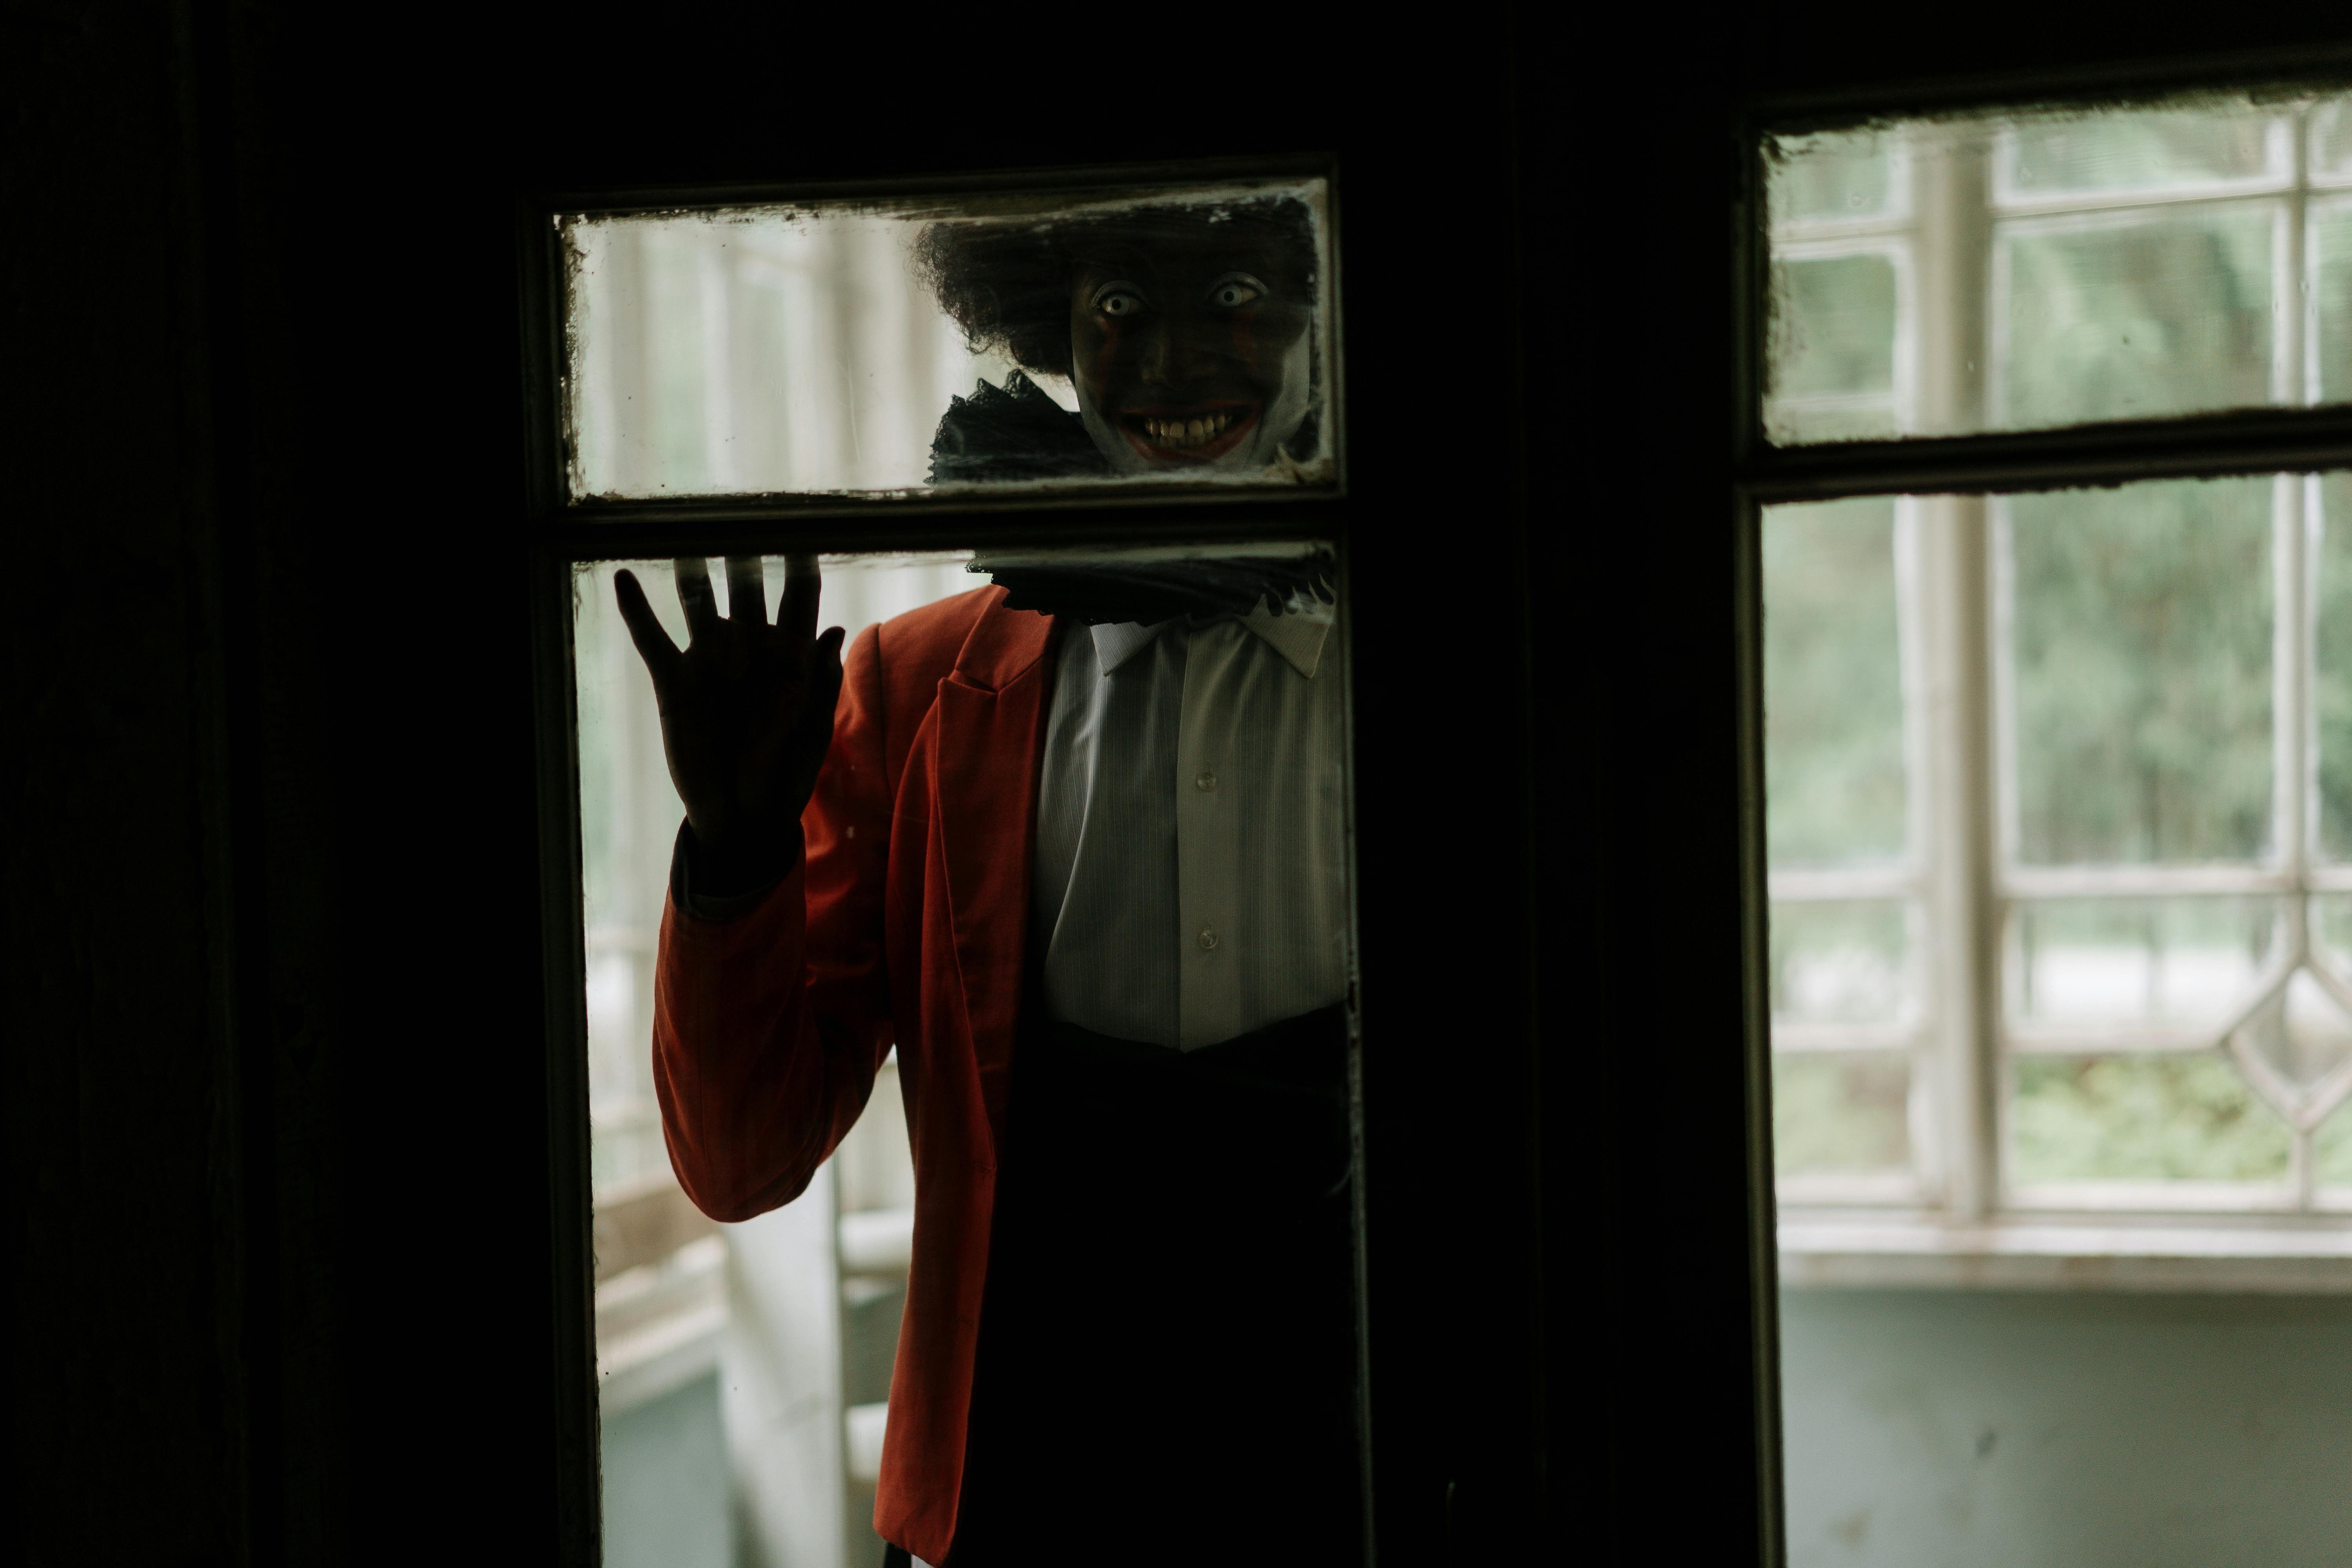 Download The Man from the Window Scary Free for Android - The Man